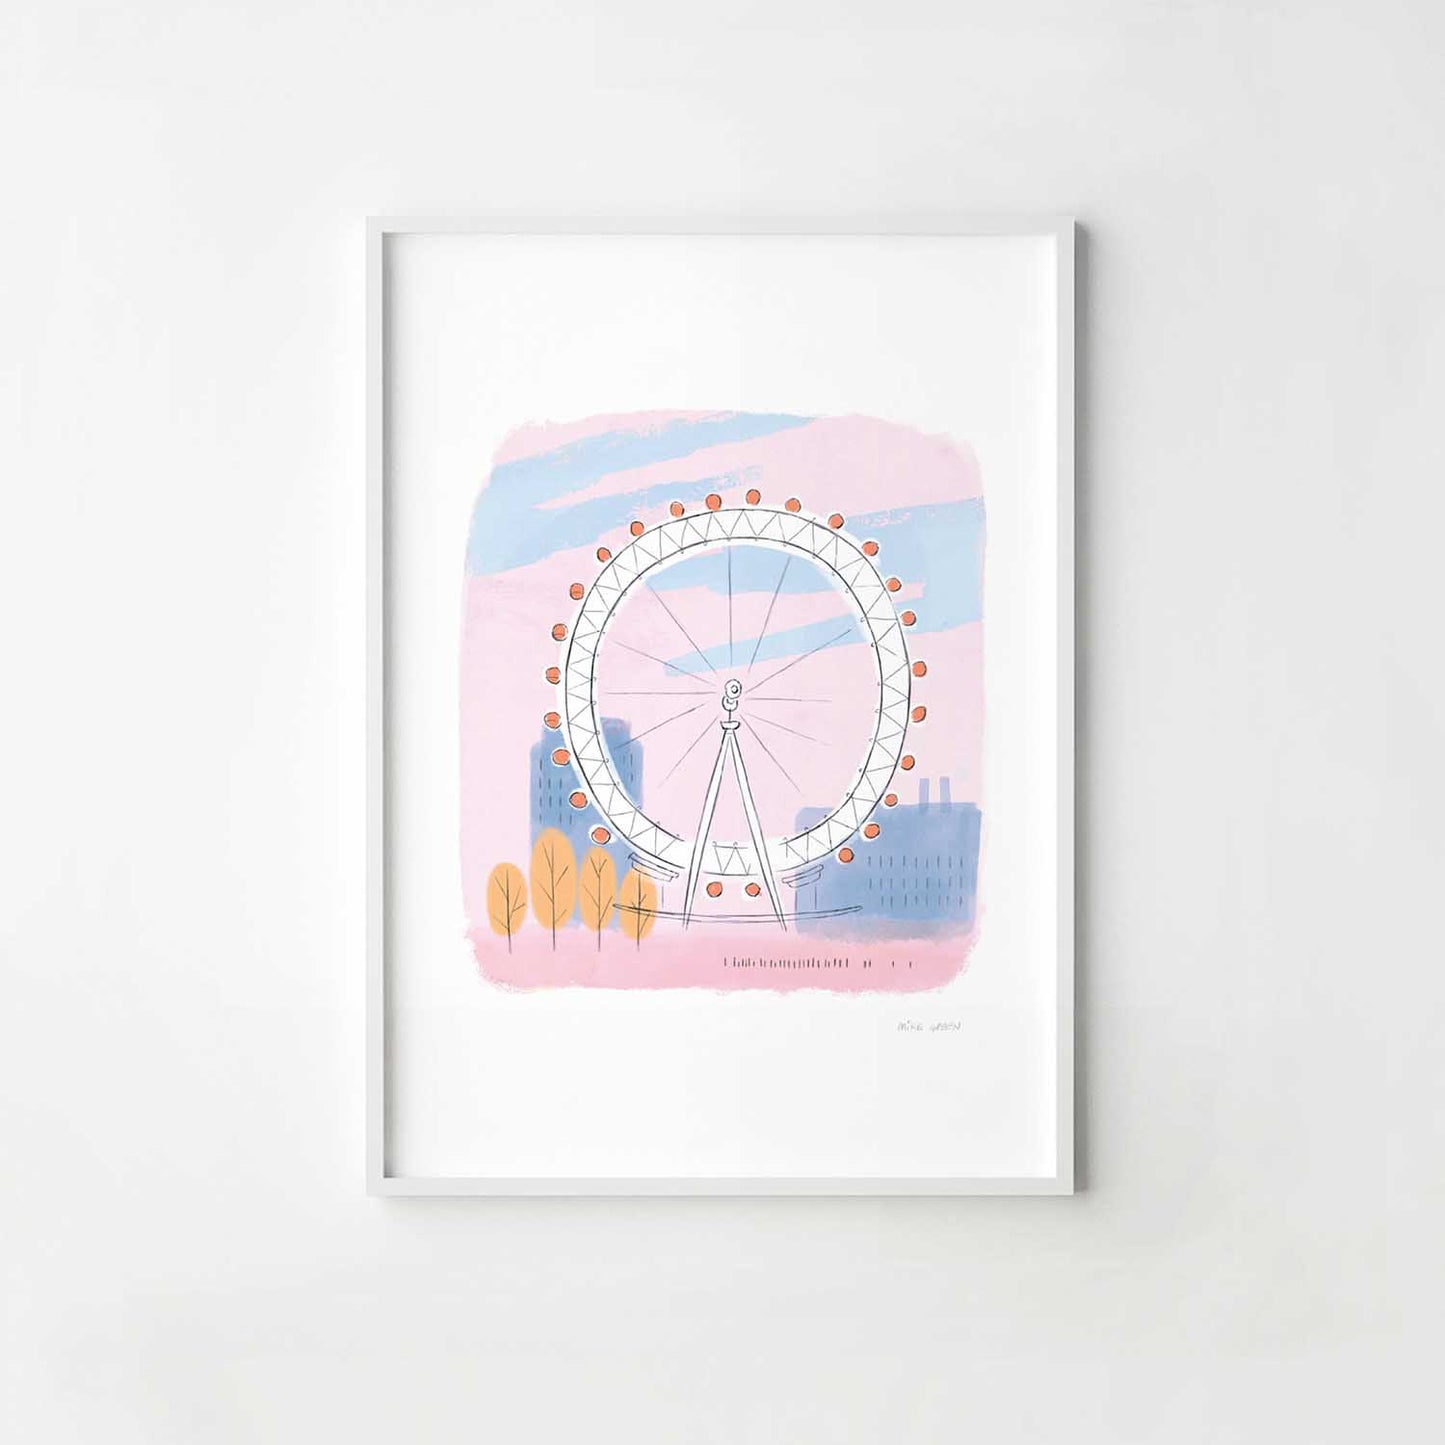 A print of the London's Eye colourfully illustrated by Mike Green.